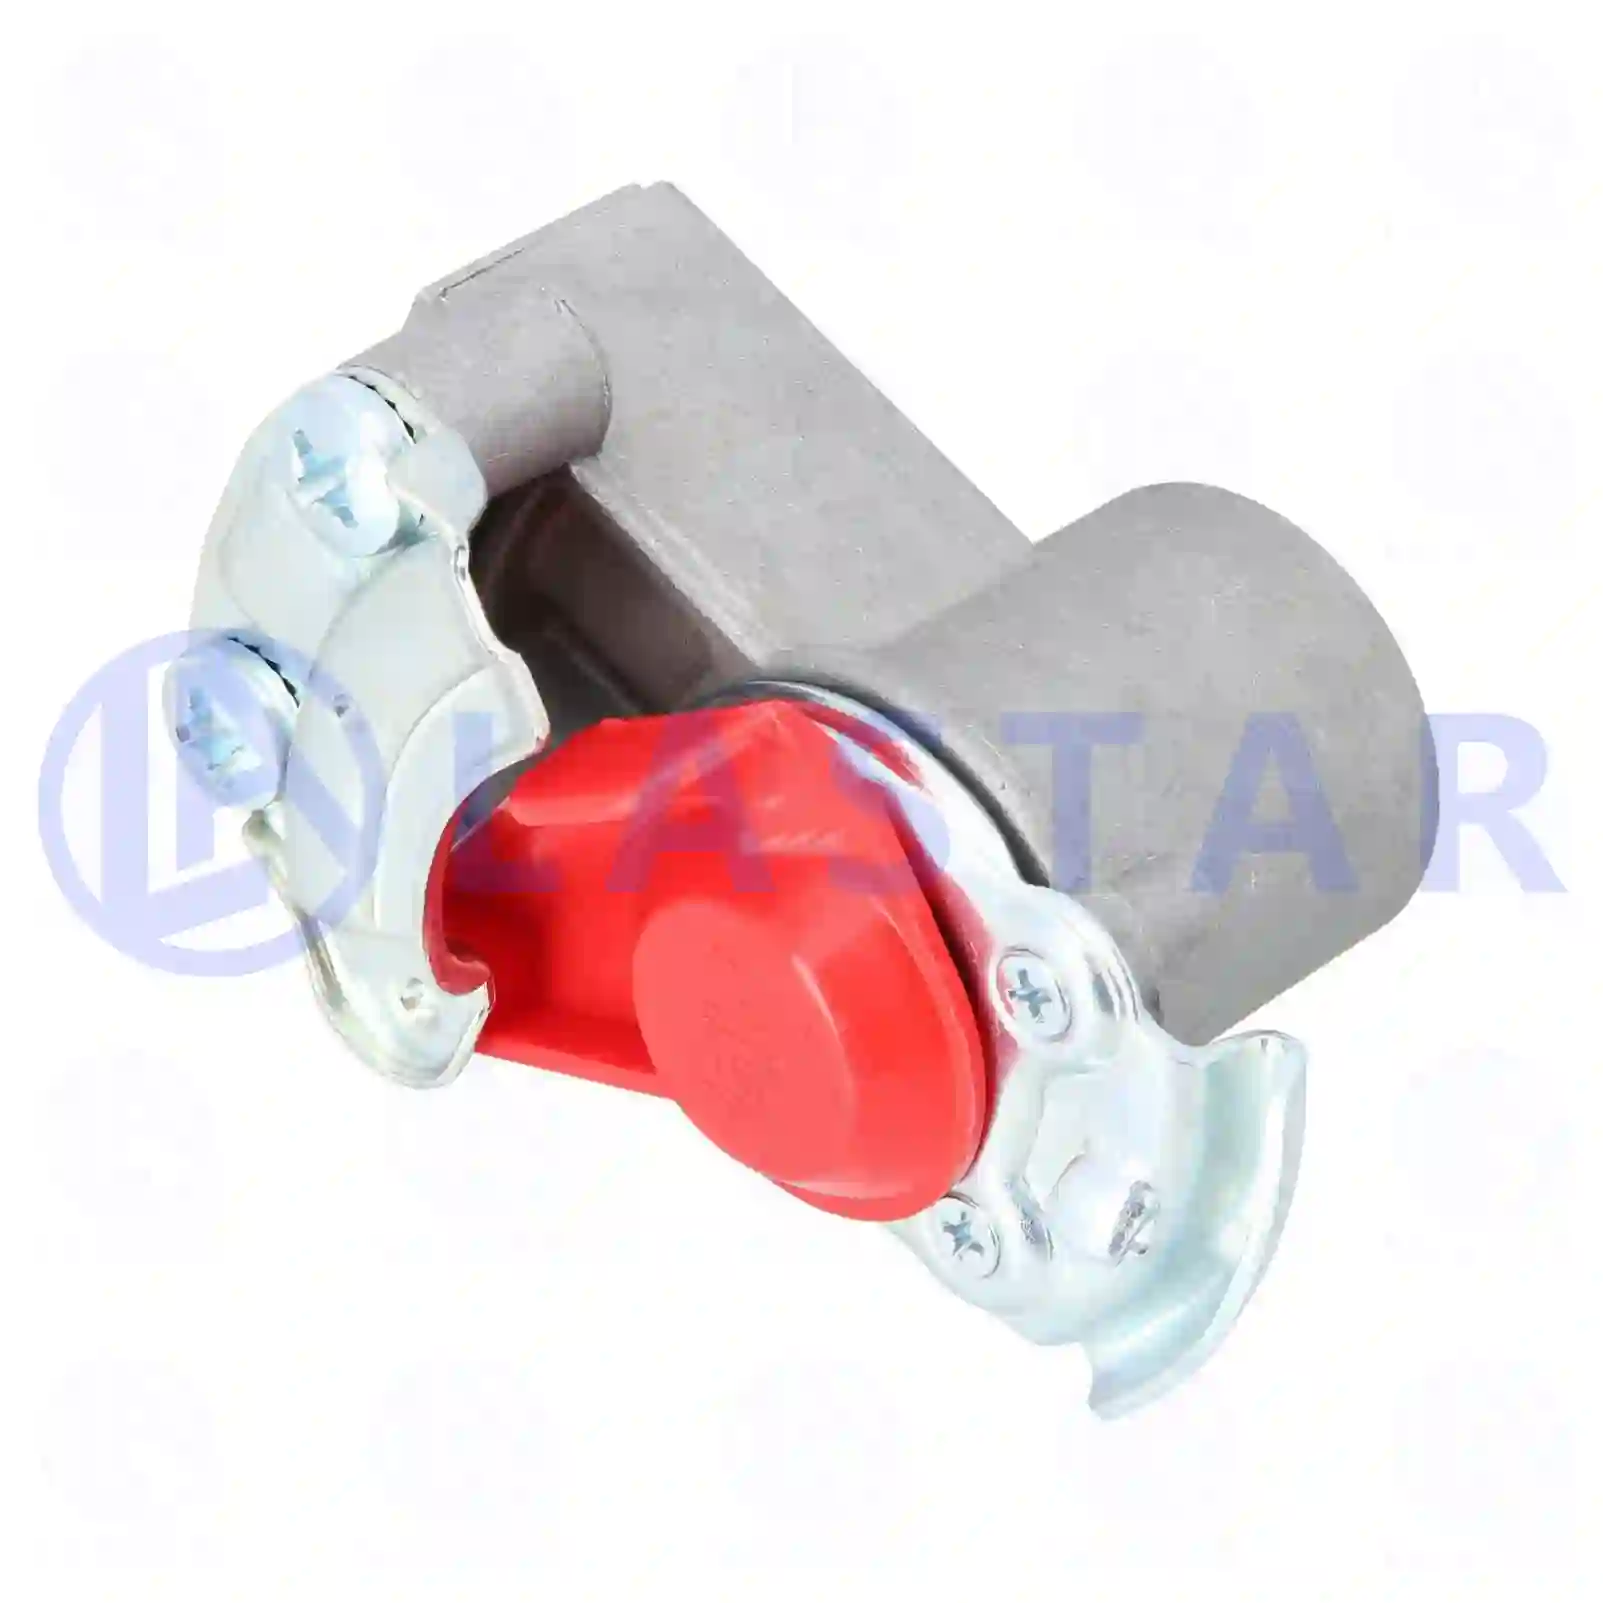  Palm coupling, red lid || Lastar Spare Part | Truck Spare Parts, Auotomotive Spare Parts